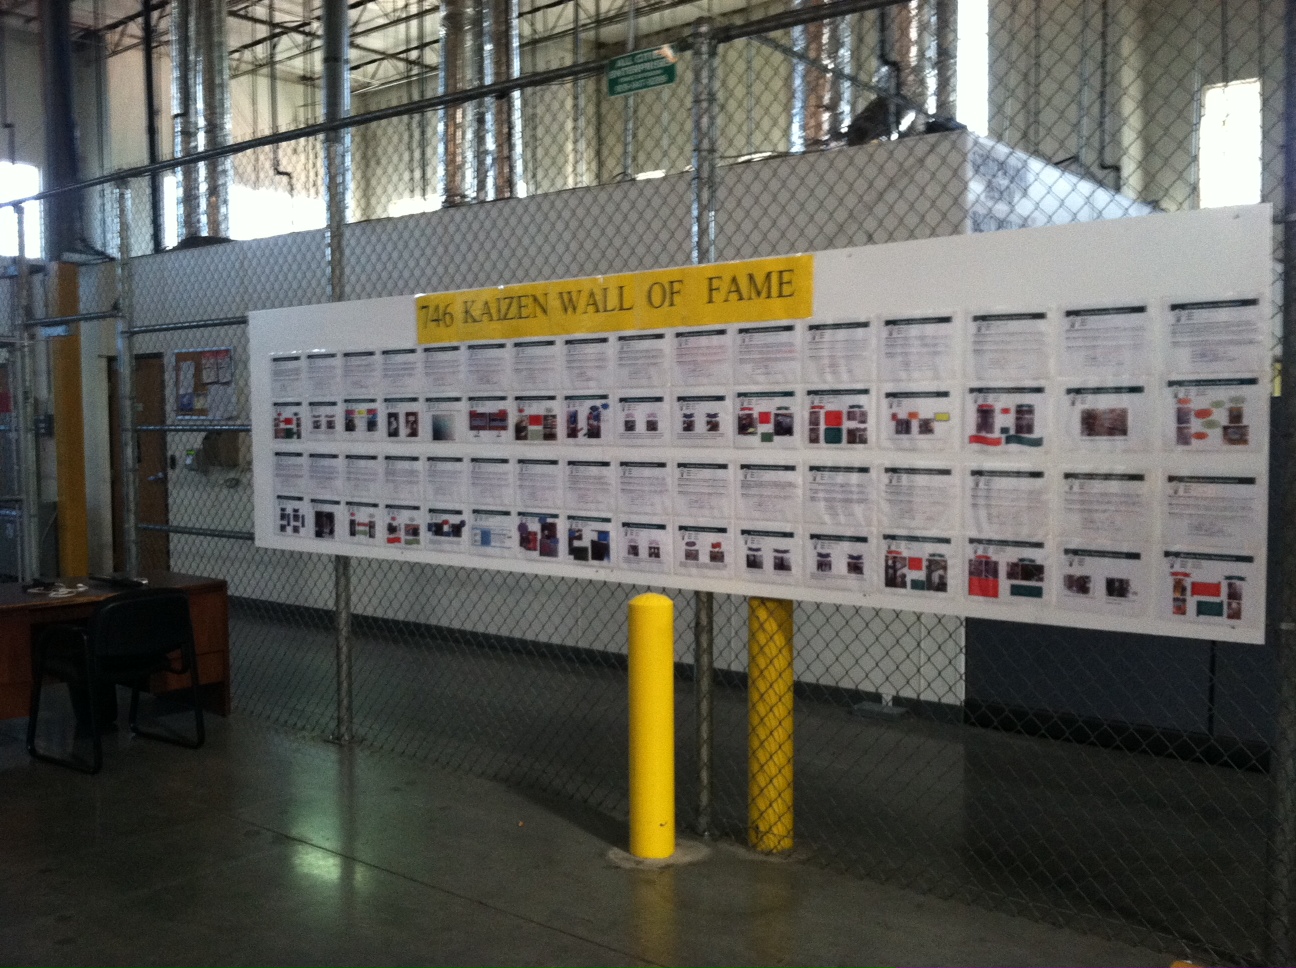 “Wall of Fame” from a 3PL & Distribution Company